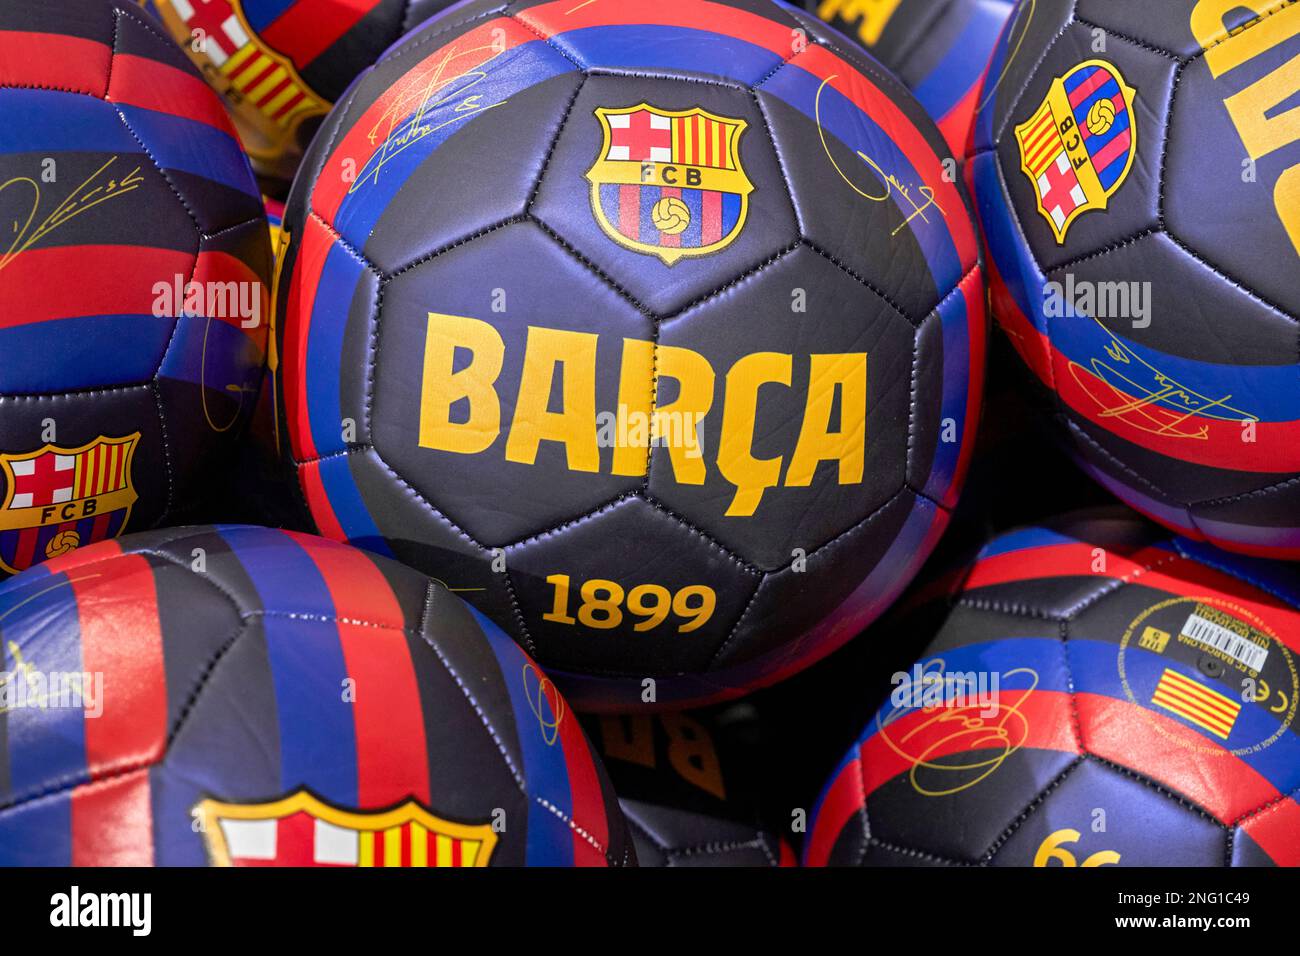 In the official store of FC Barcelona at Camp Nou arena Stock Photo